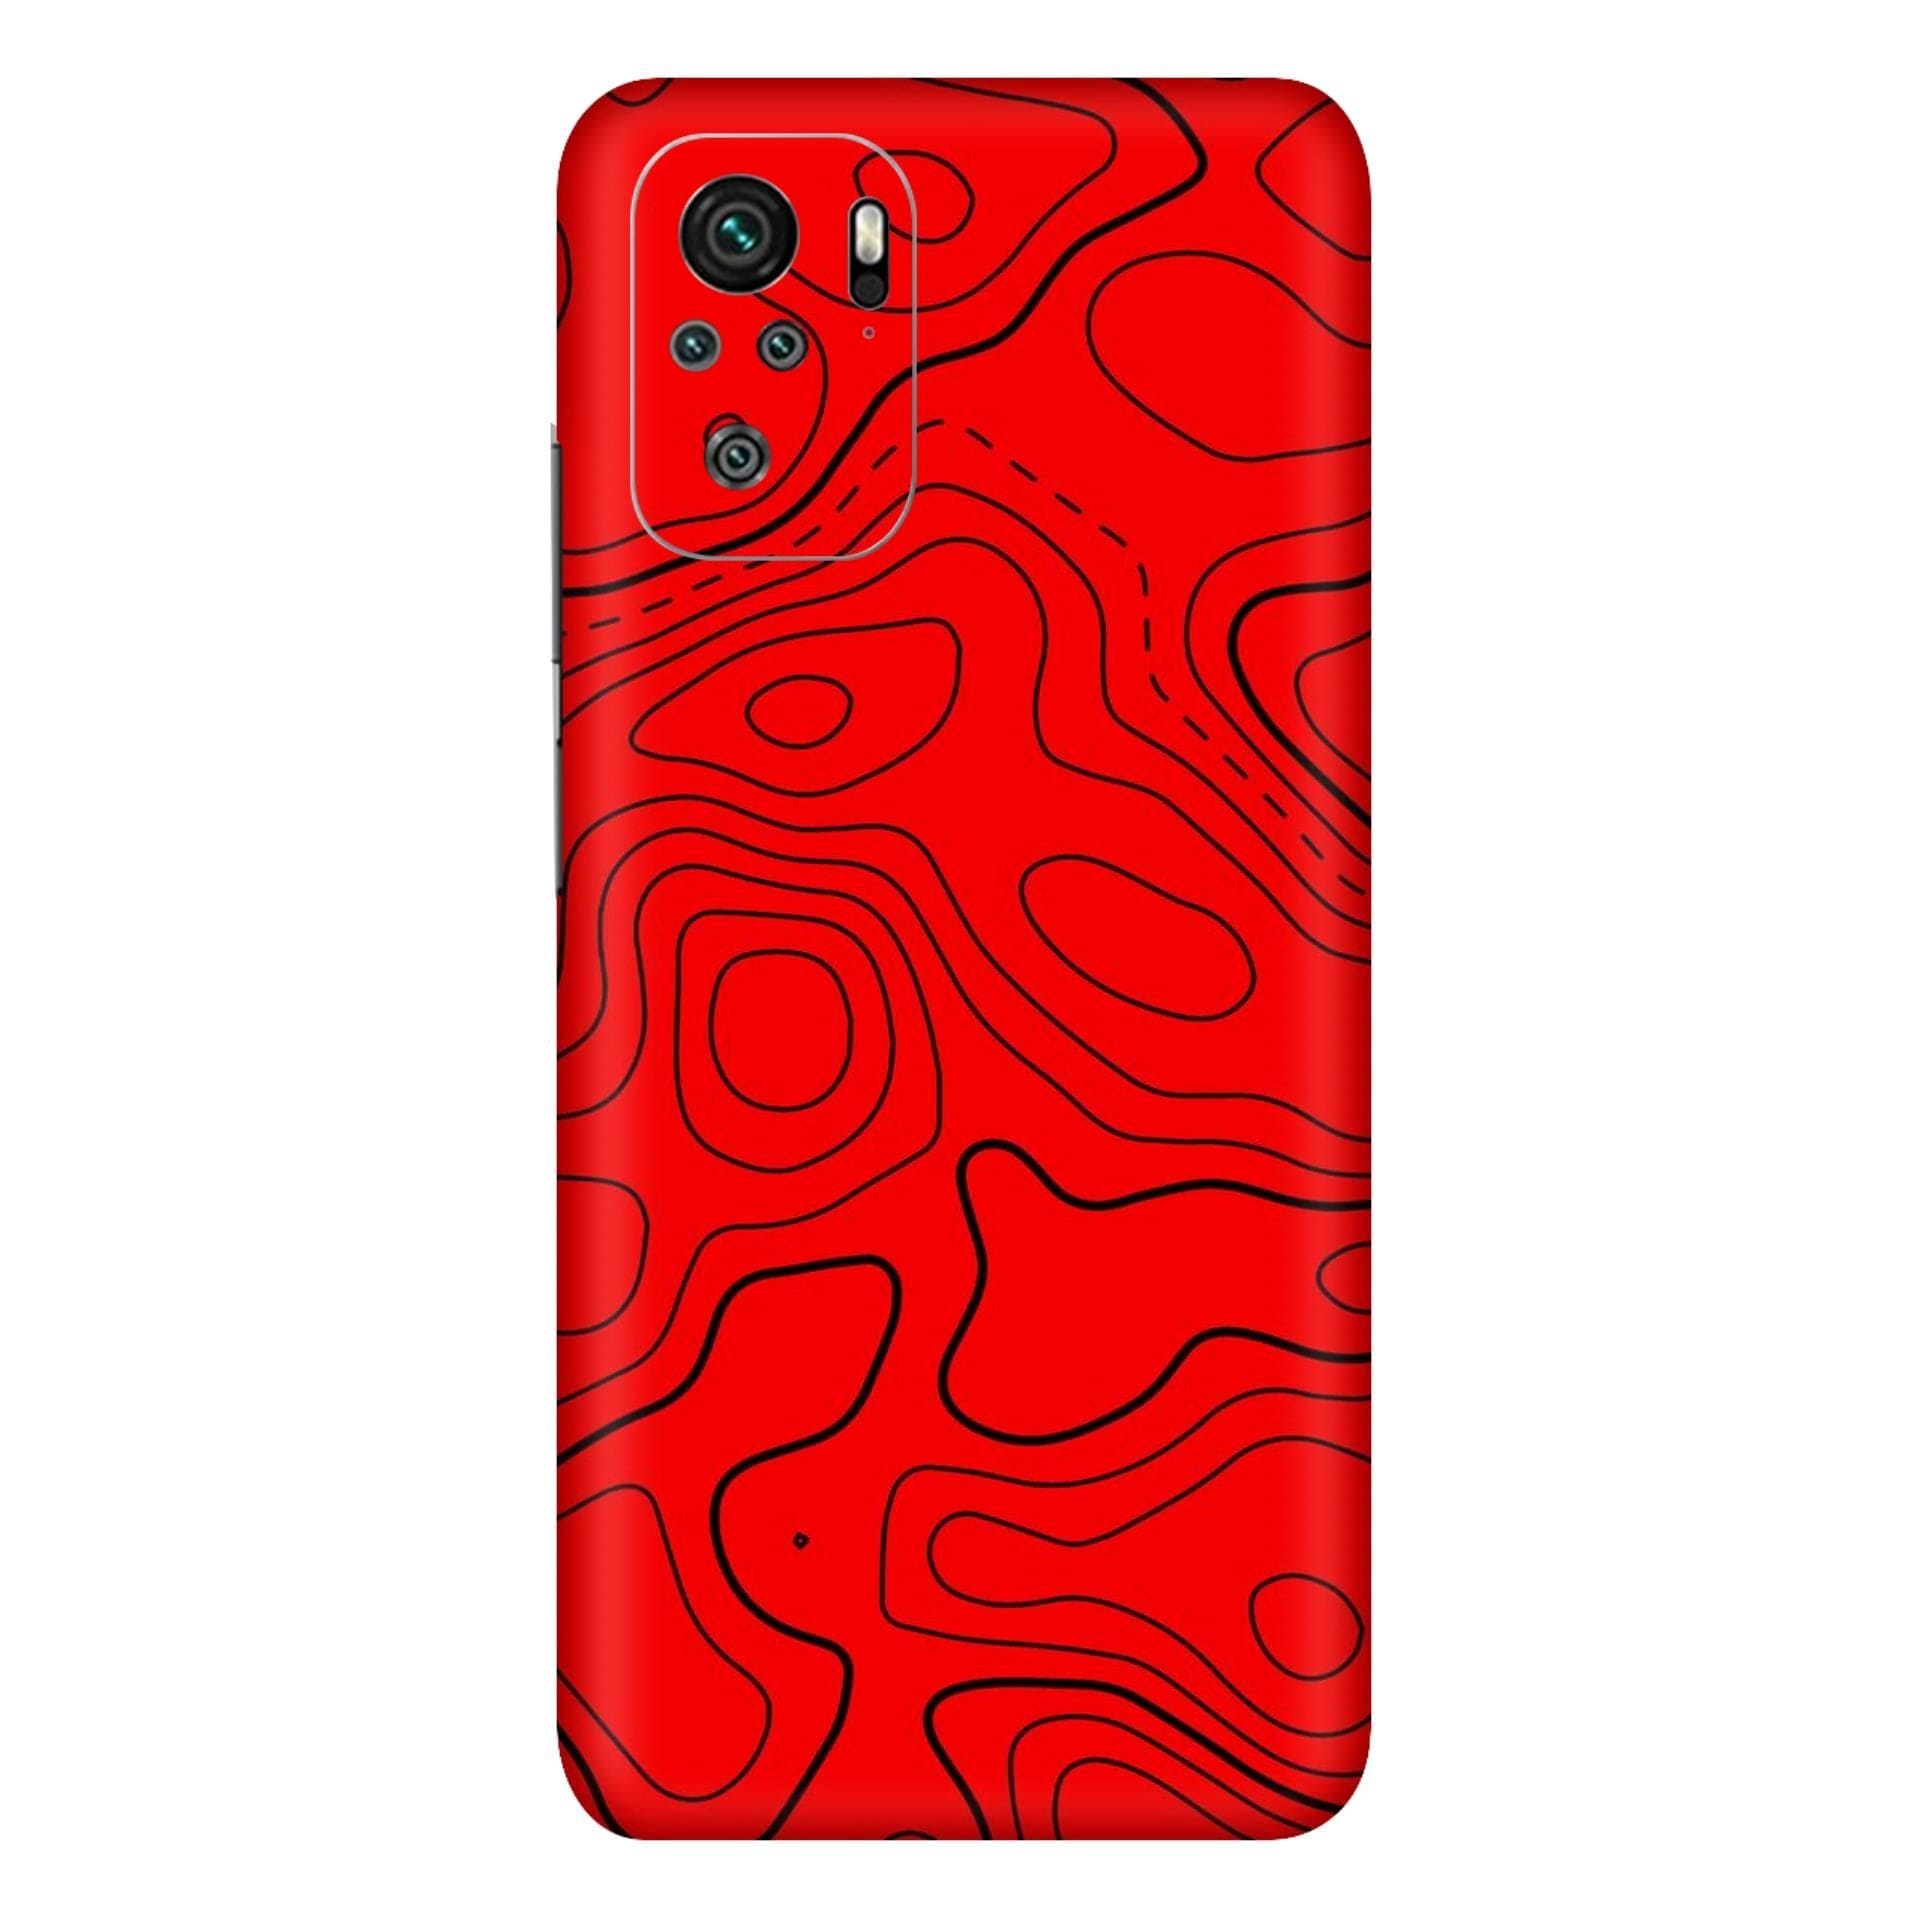 Redmi Note 10 Damascus Red skins